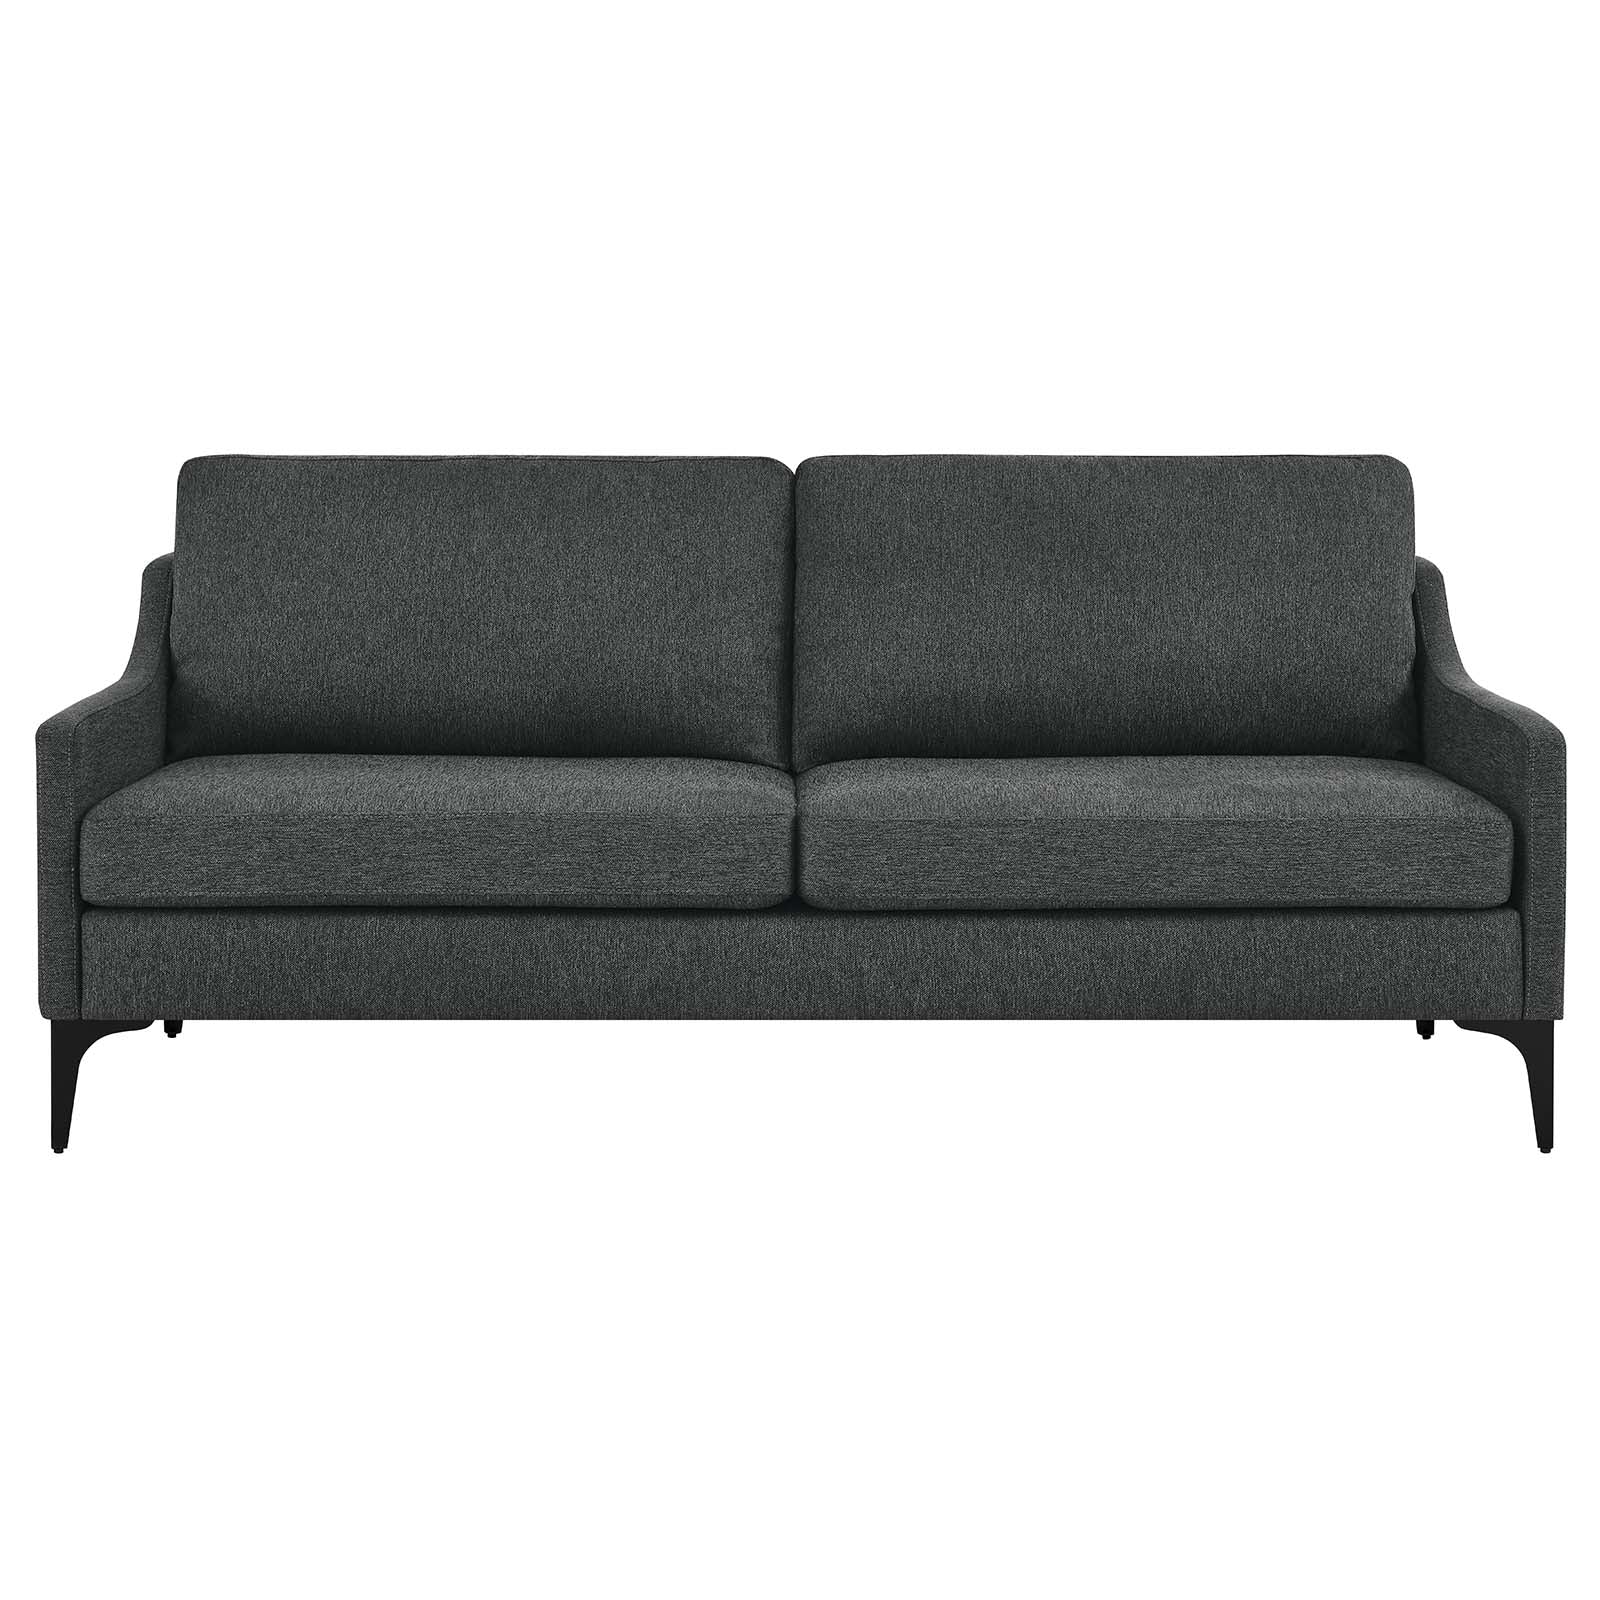 Modway Sofas & Couches - Corland Upholstered Fabric Sofa Charcoal